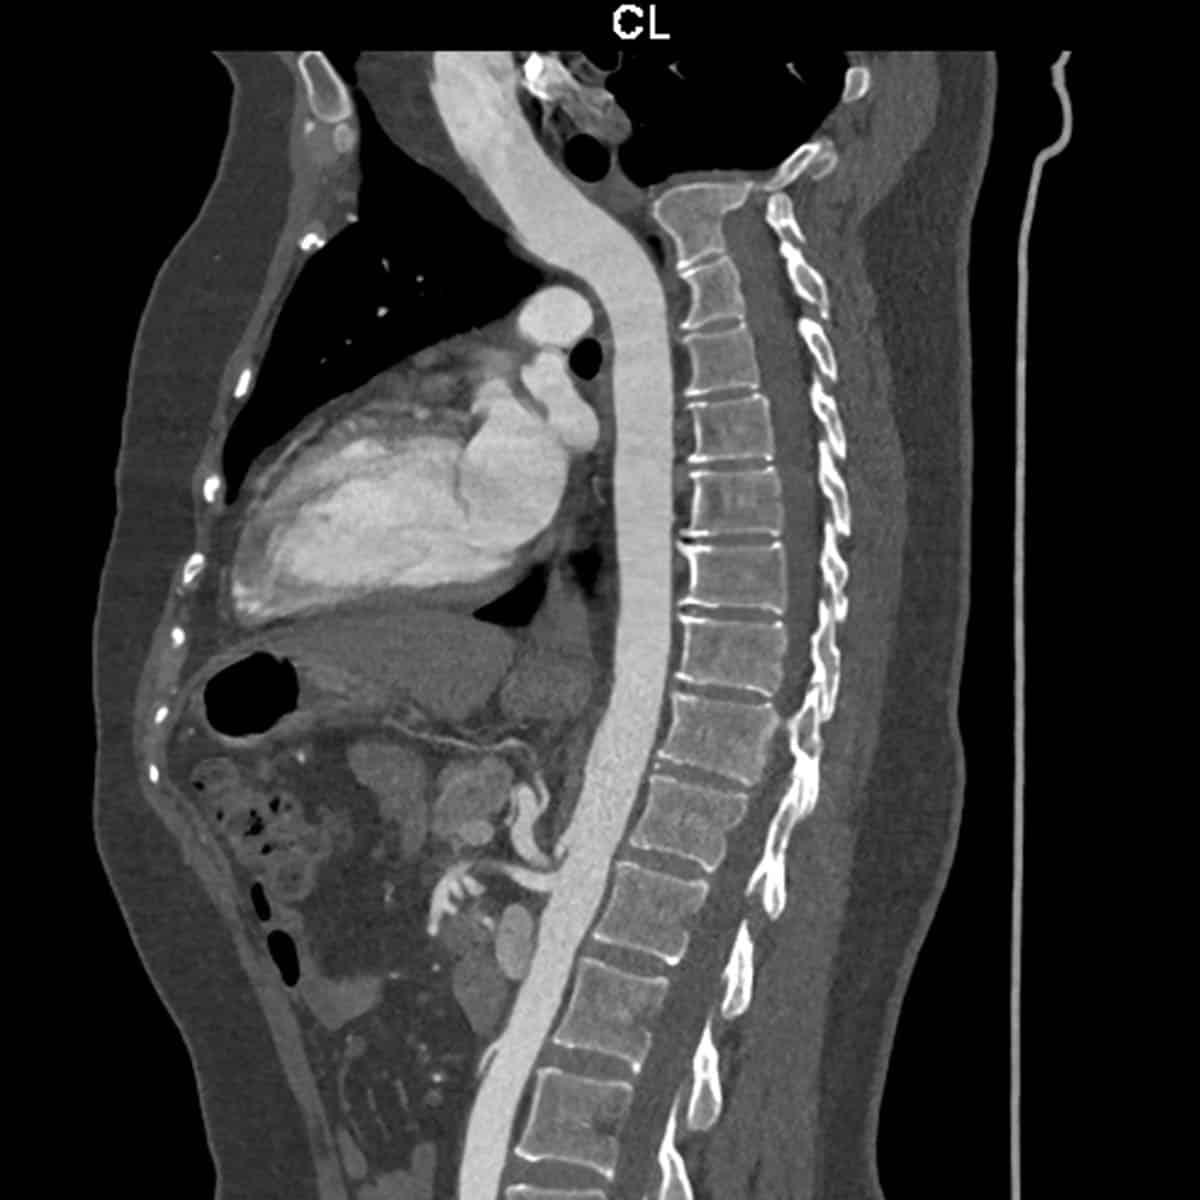 CT scan of thoracic aorta angiogram